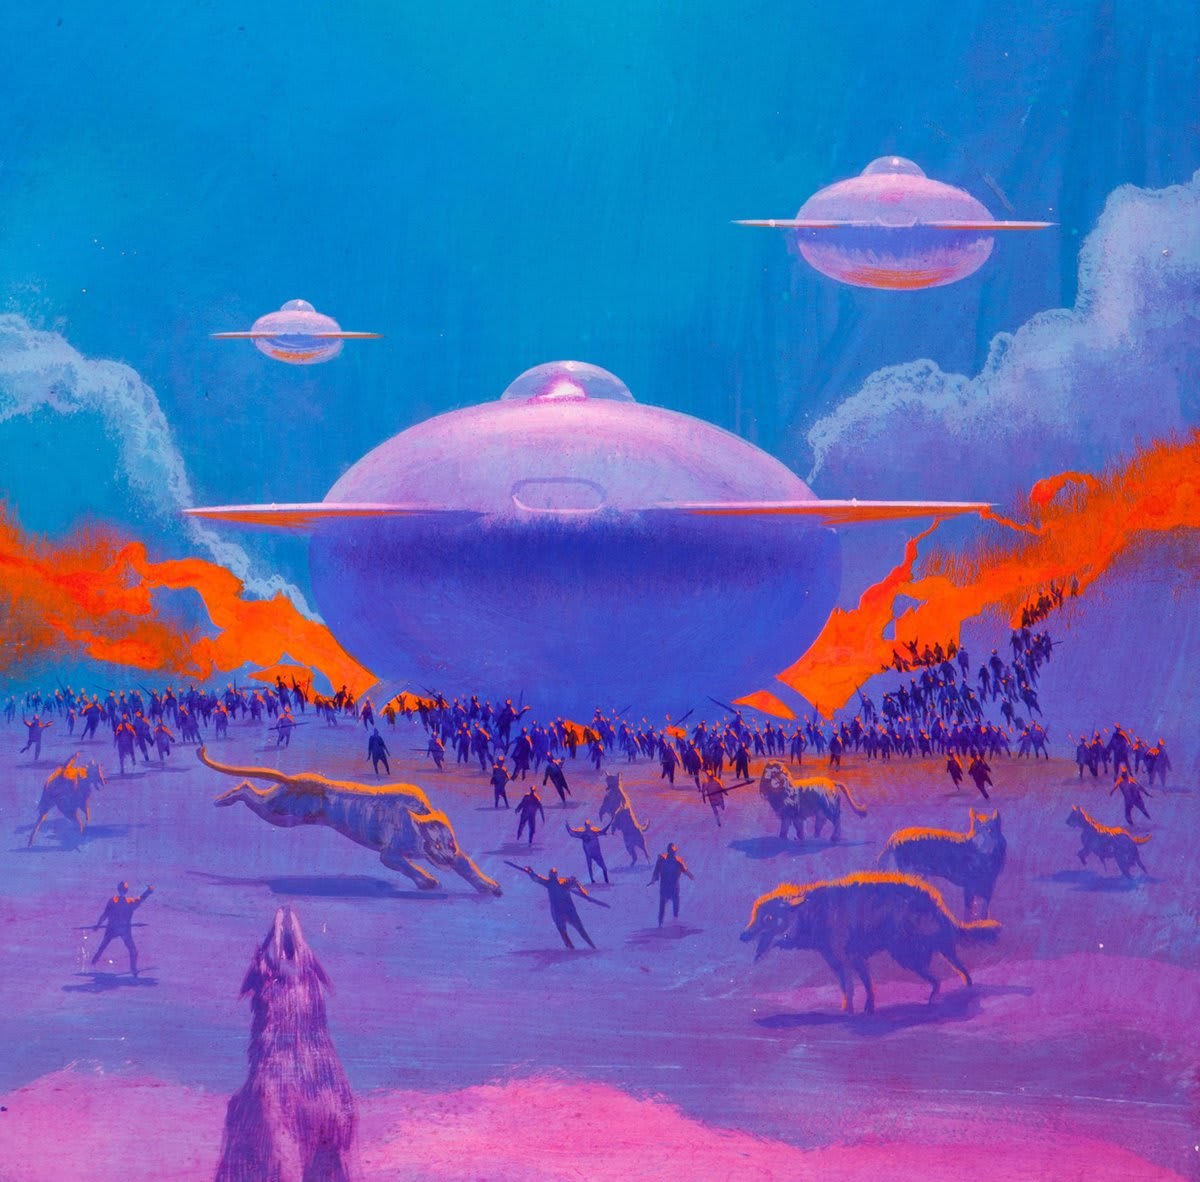 Flying saucers by Paul Lehr, Tim White, Alex Schomburg, and Bruce Pennington.